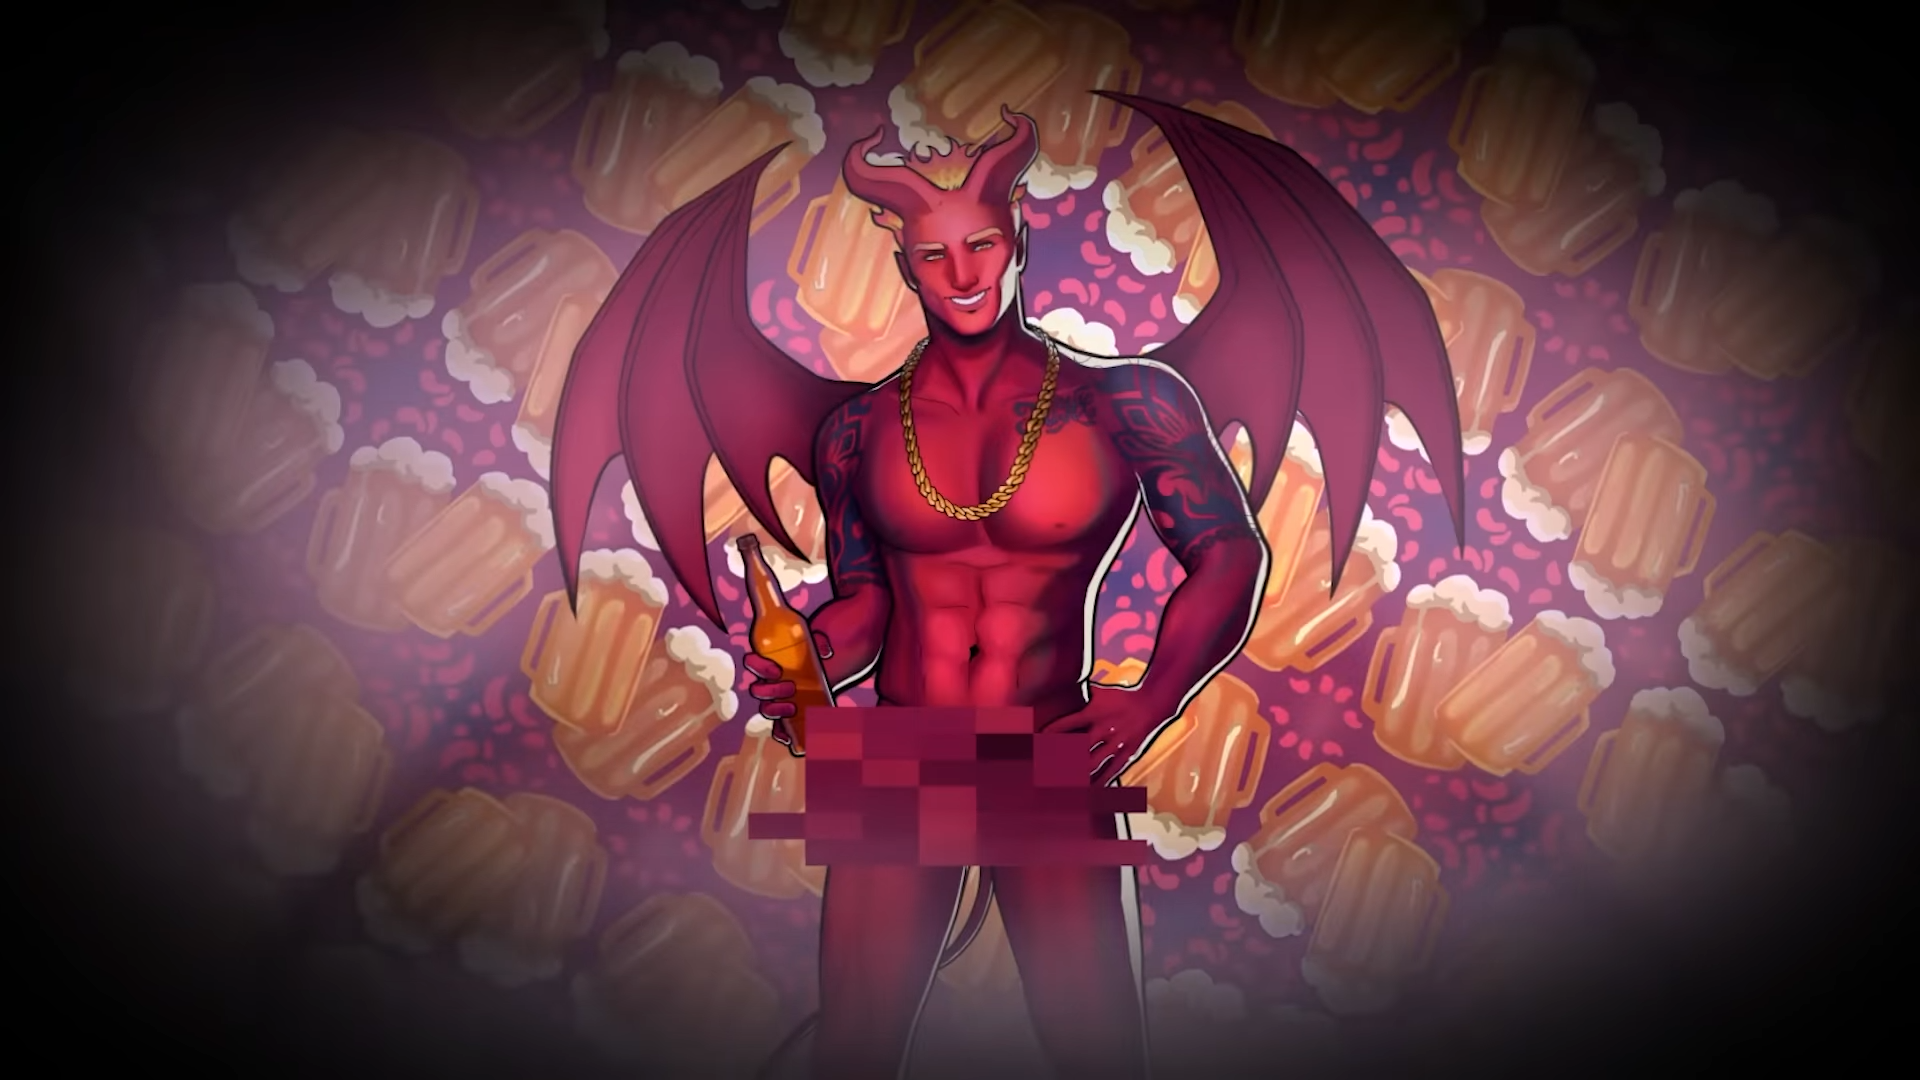 Character art for the dateable option Brocifer in Romancelvania. A muscular red demon with blonde hair, tattoos, and no clothes (except for some light pixellation) stands against a background of cartoon beer mugs.